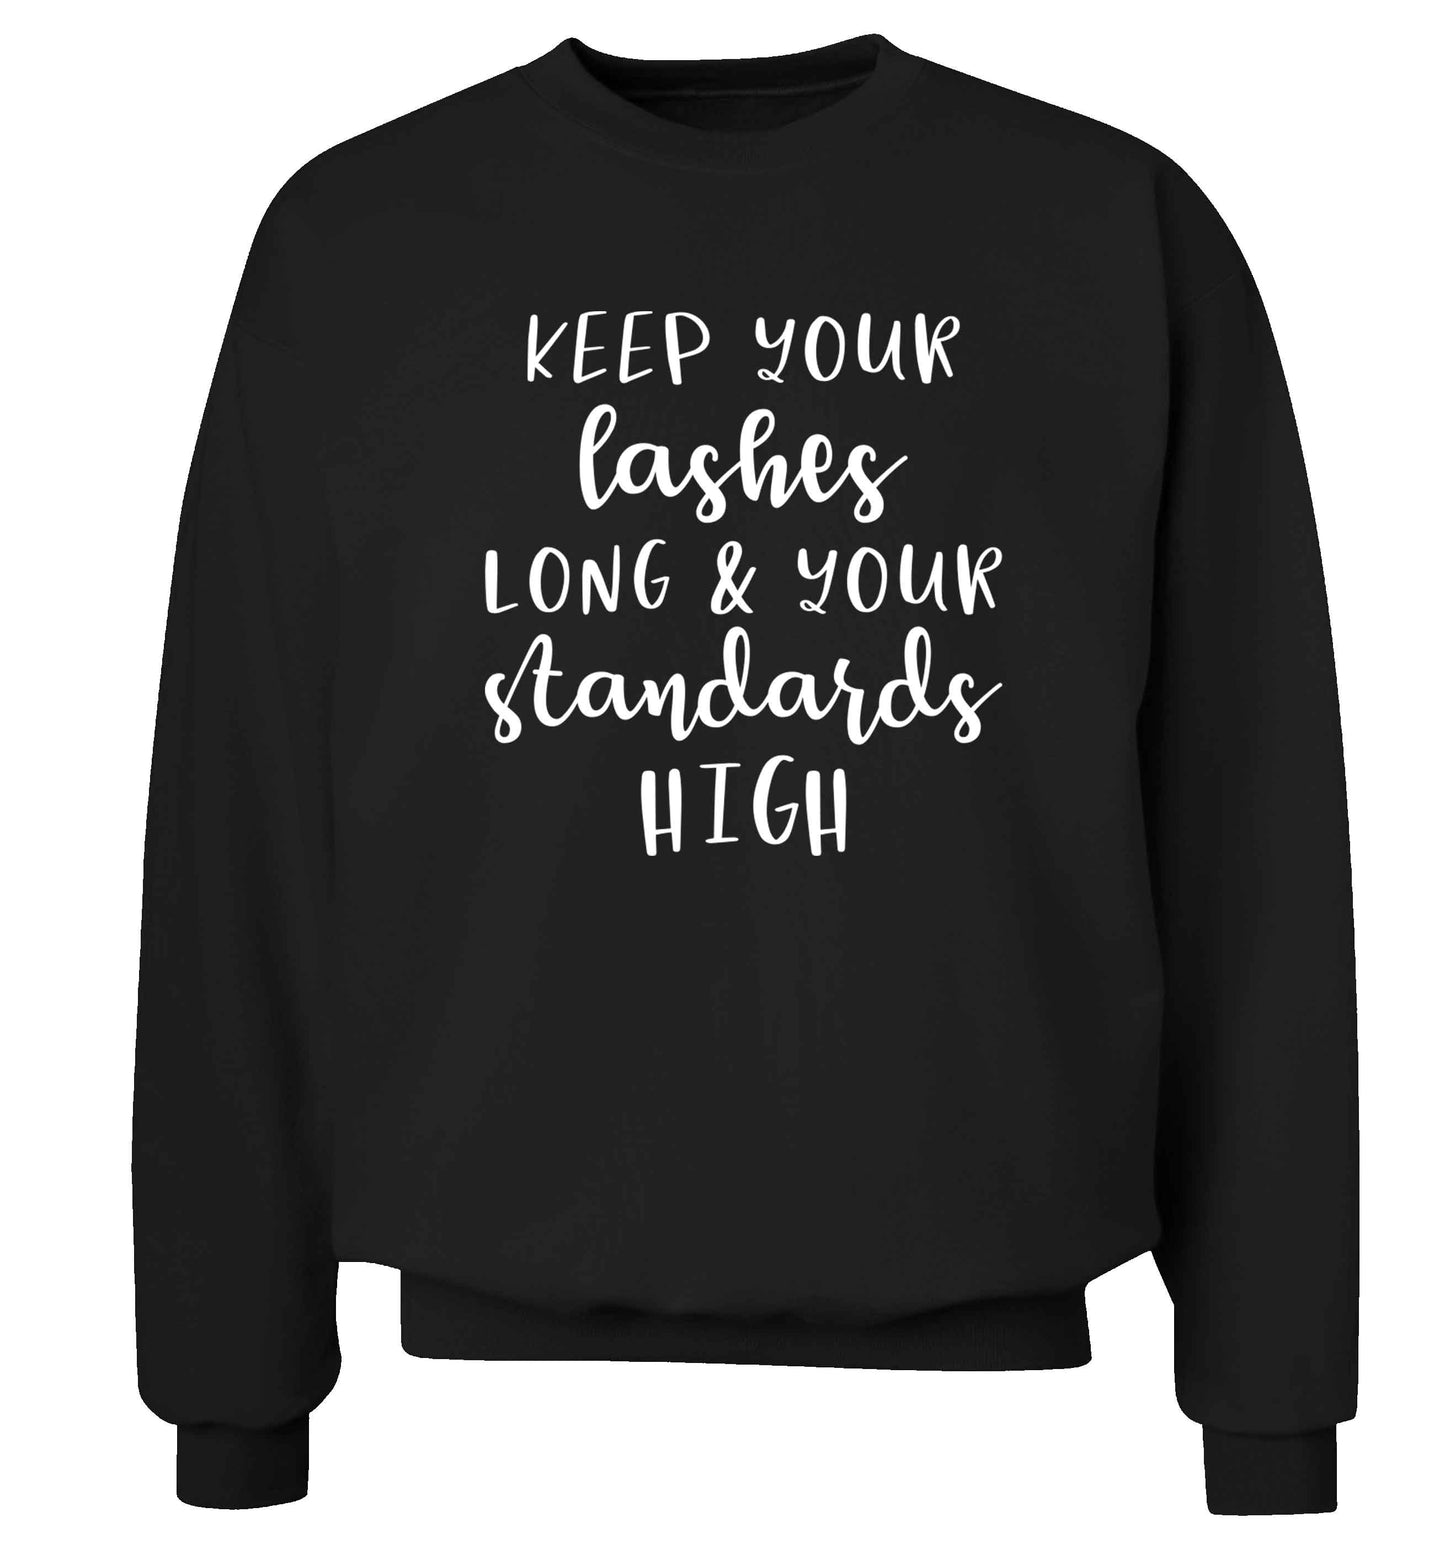 Keep your lashes long and your standards high Adult's unisex black Sweater 2XL